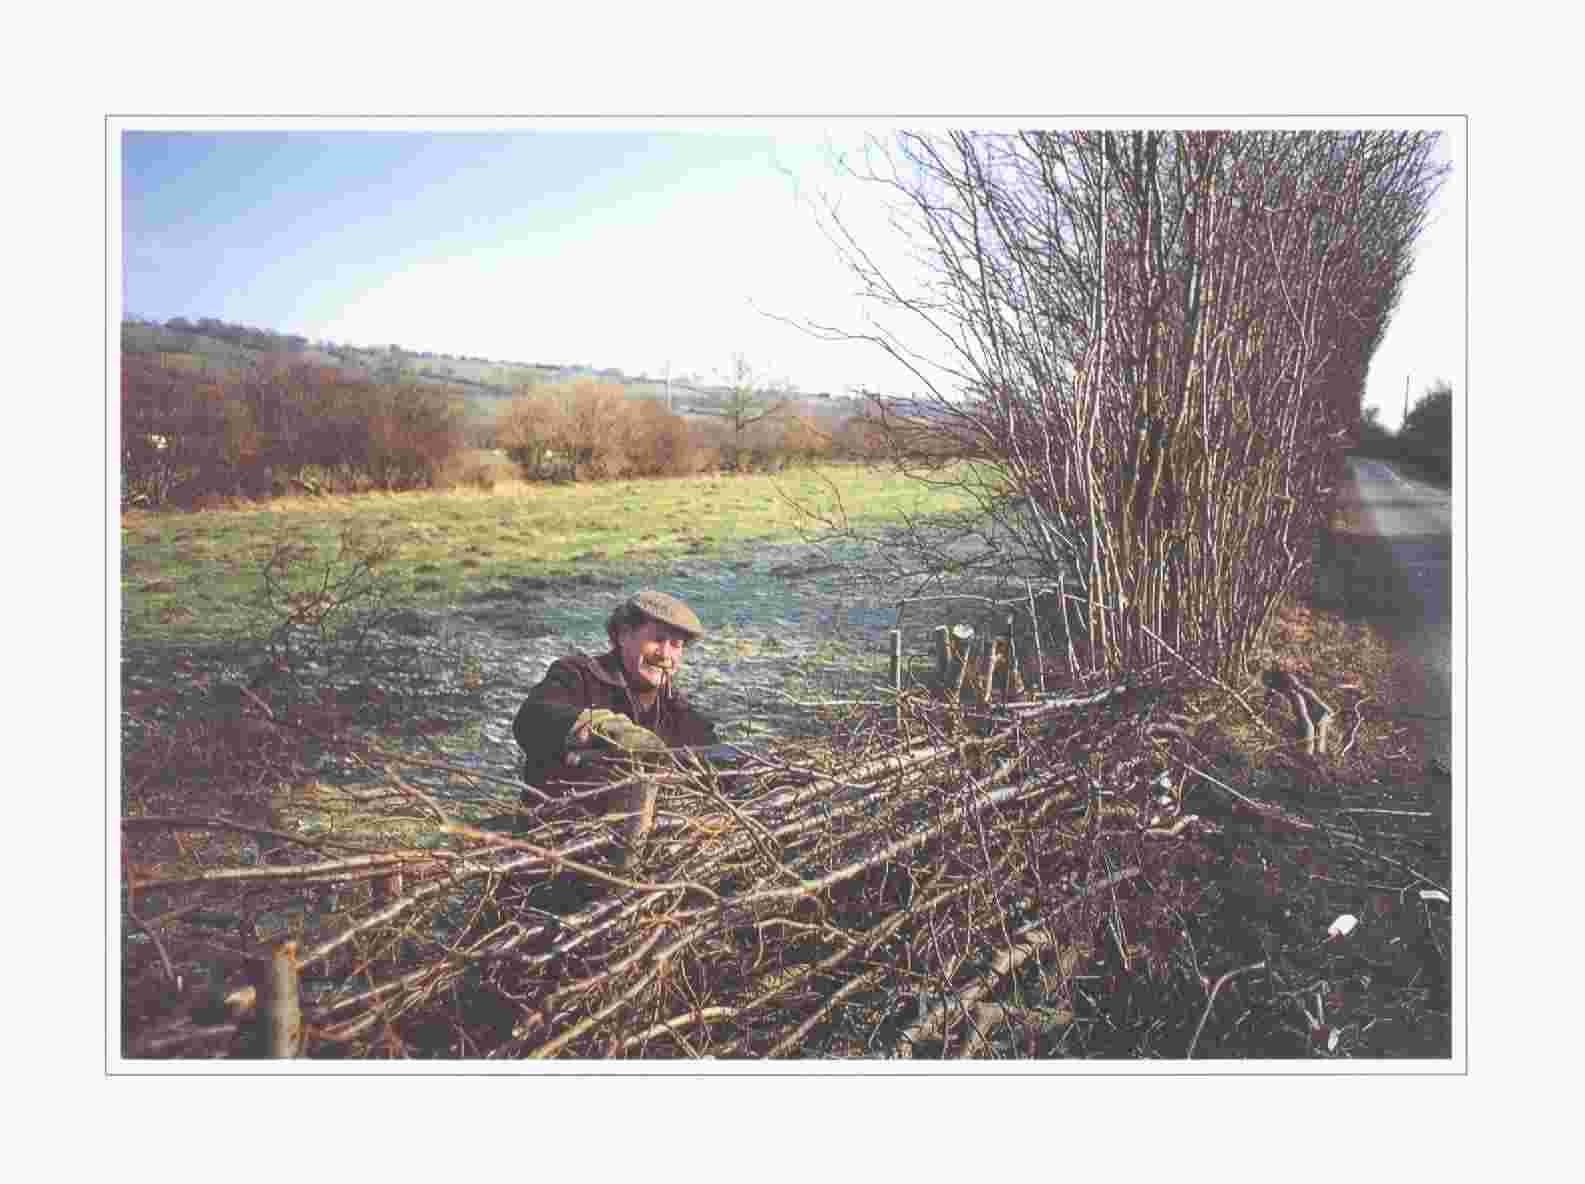 Traditional hedge laying (photo: Archie Miles)